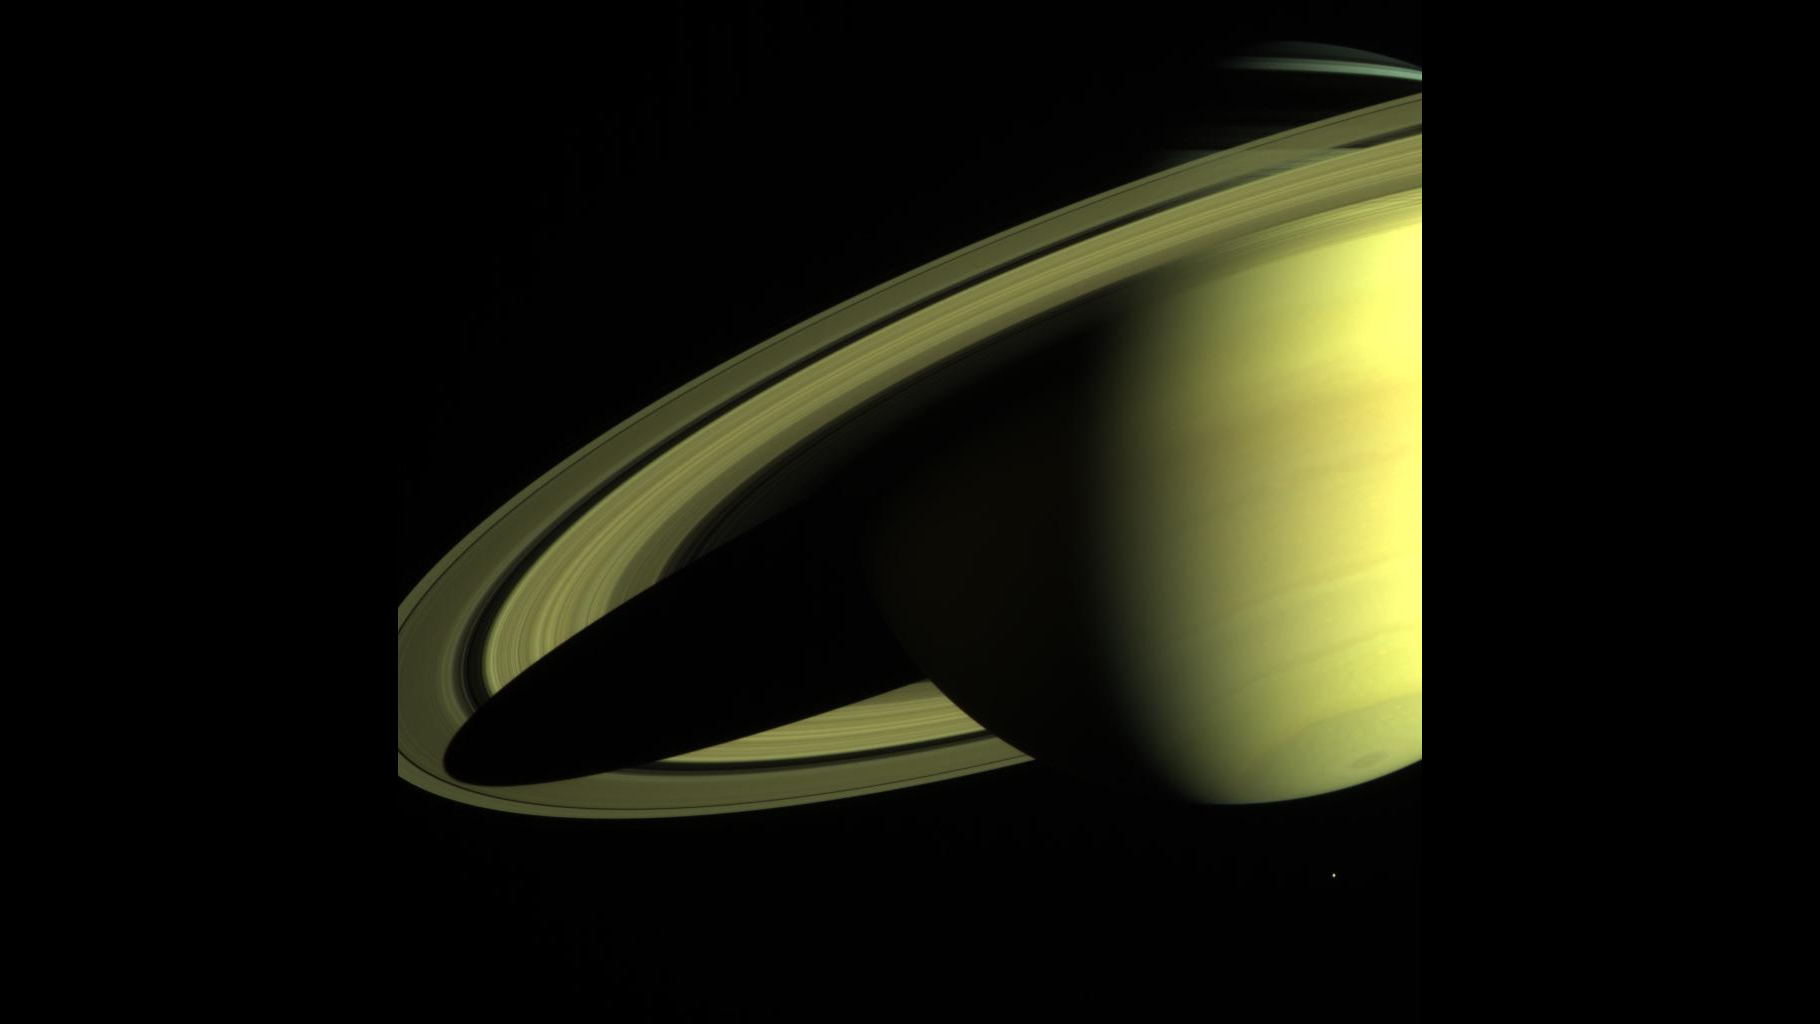 Saturn imaged by Cassini-Huygens shows the large ring system in partial shadow.